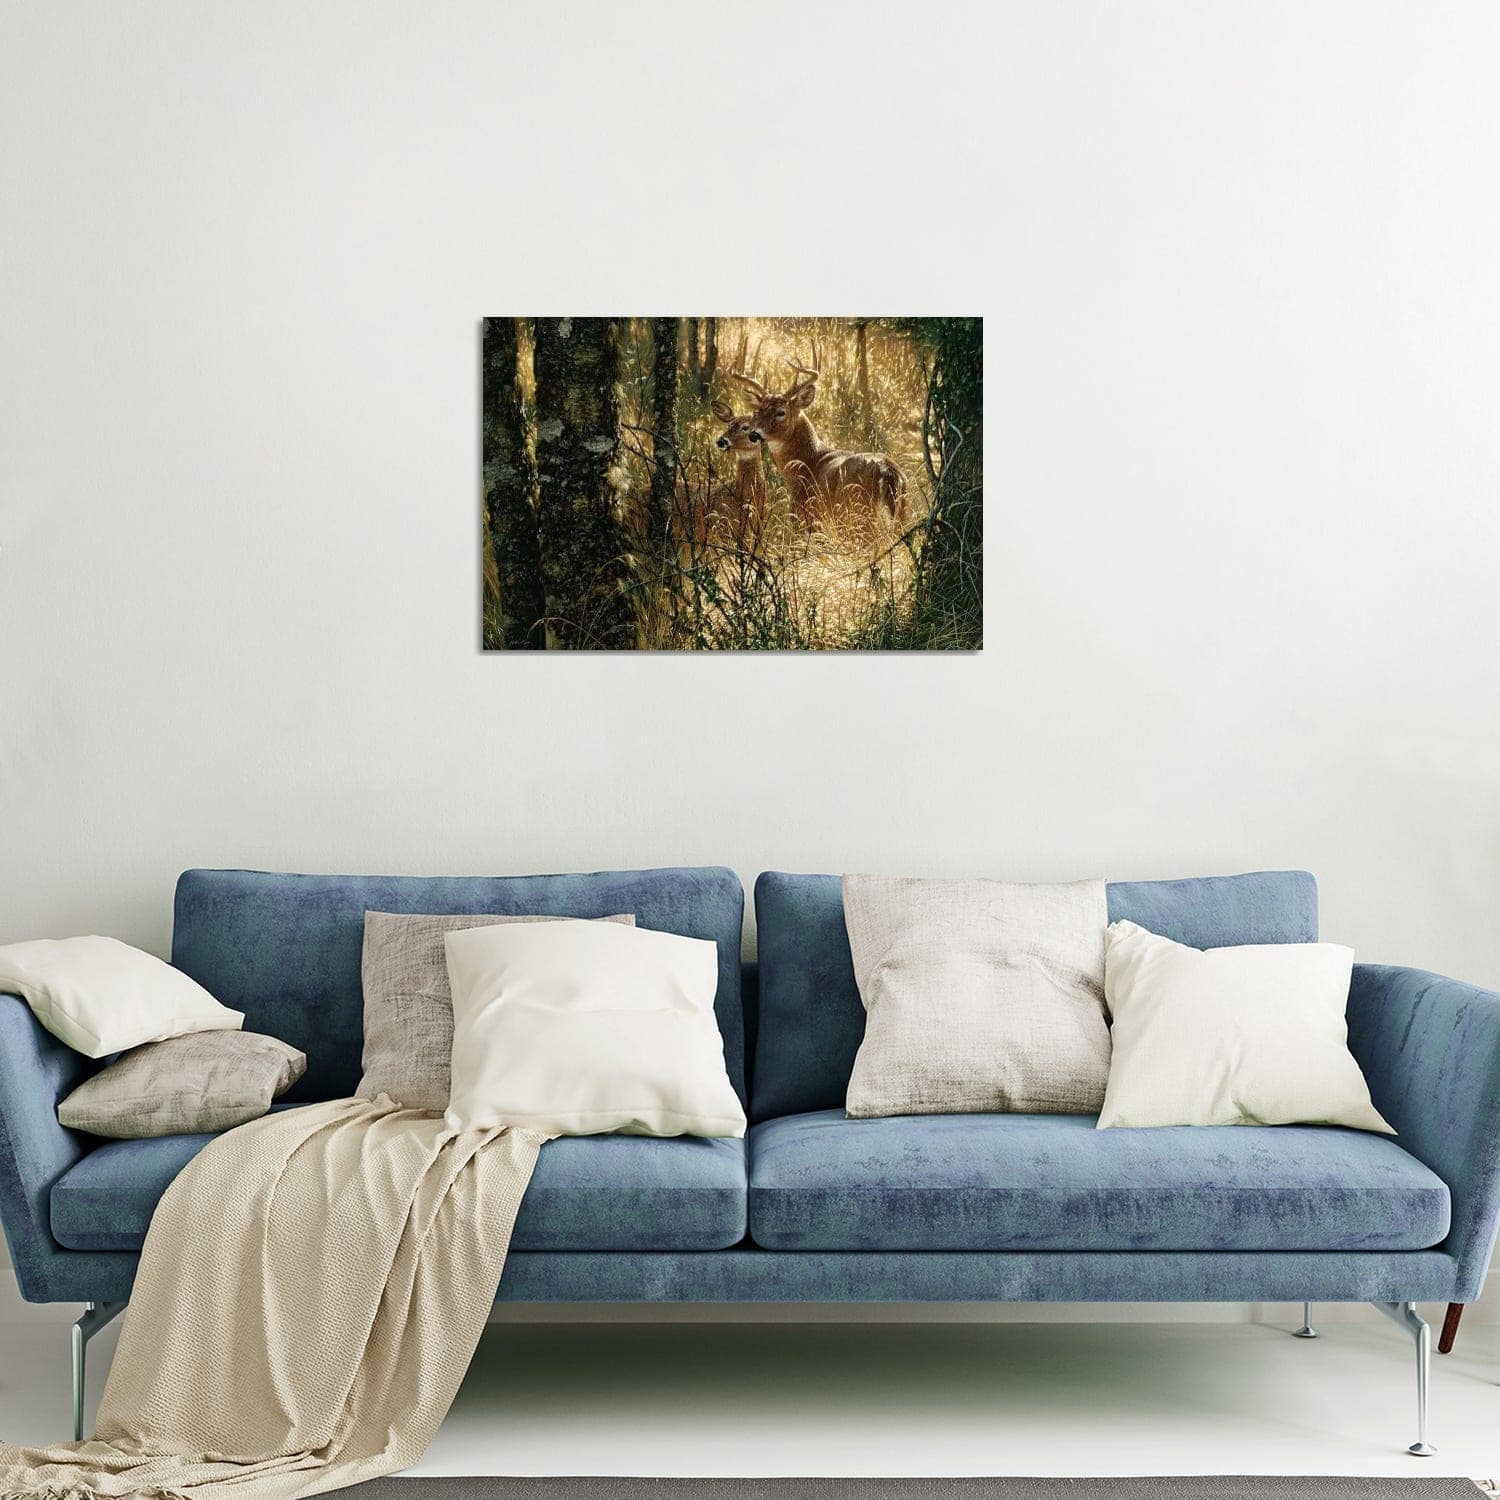 A Golden Moment - Whitetail Deer, Horizontal Print On Acrylic Glass by ...